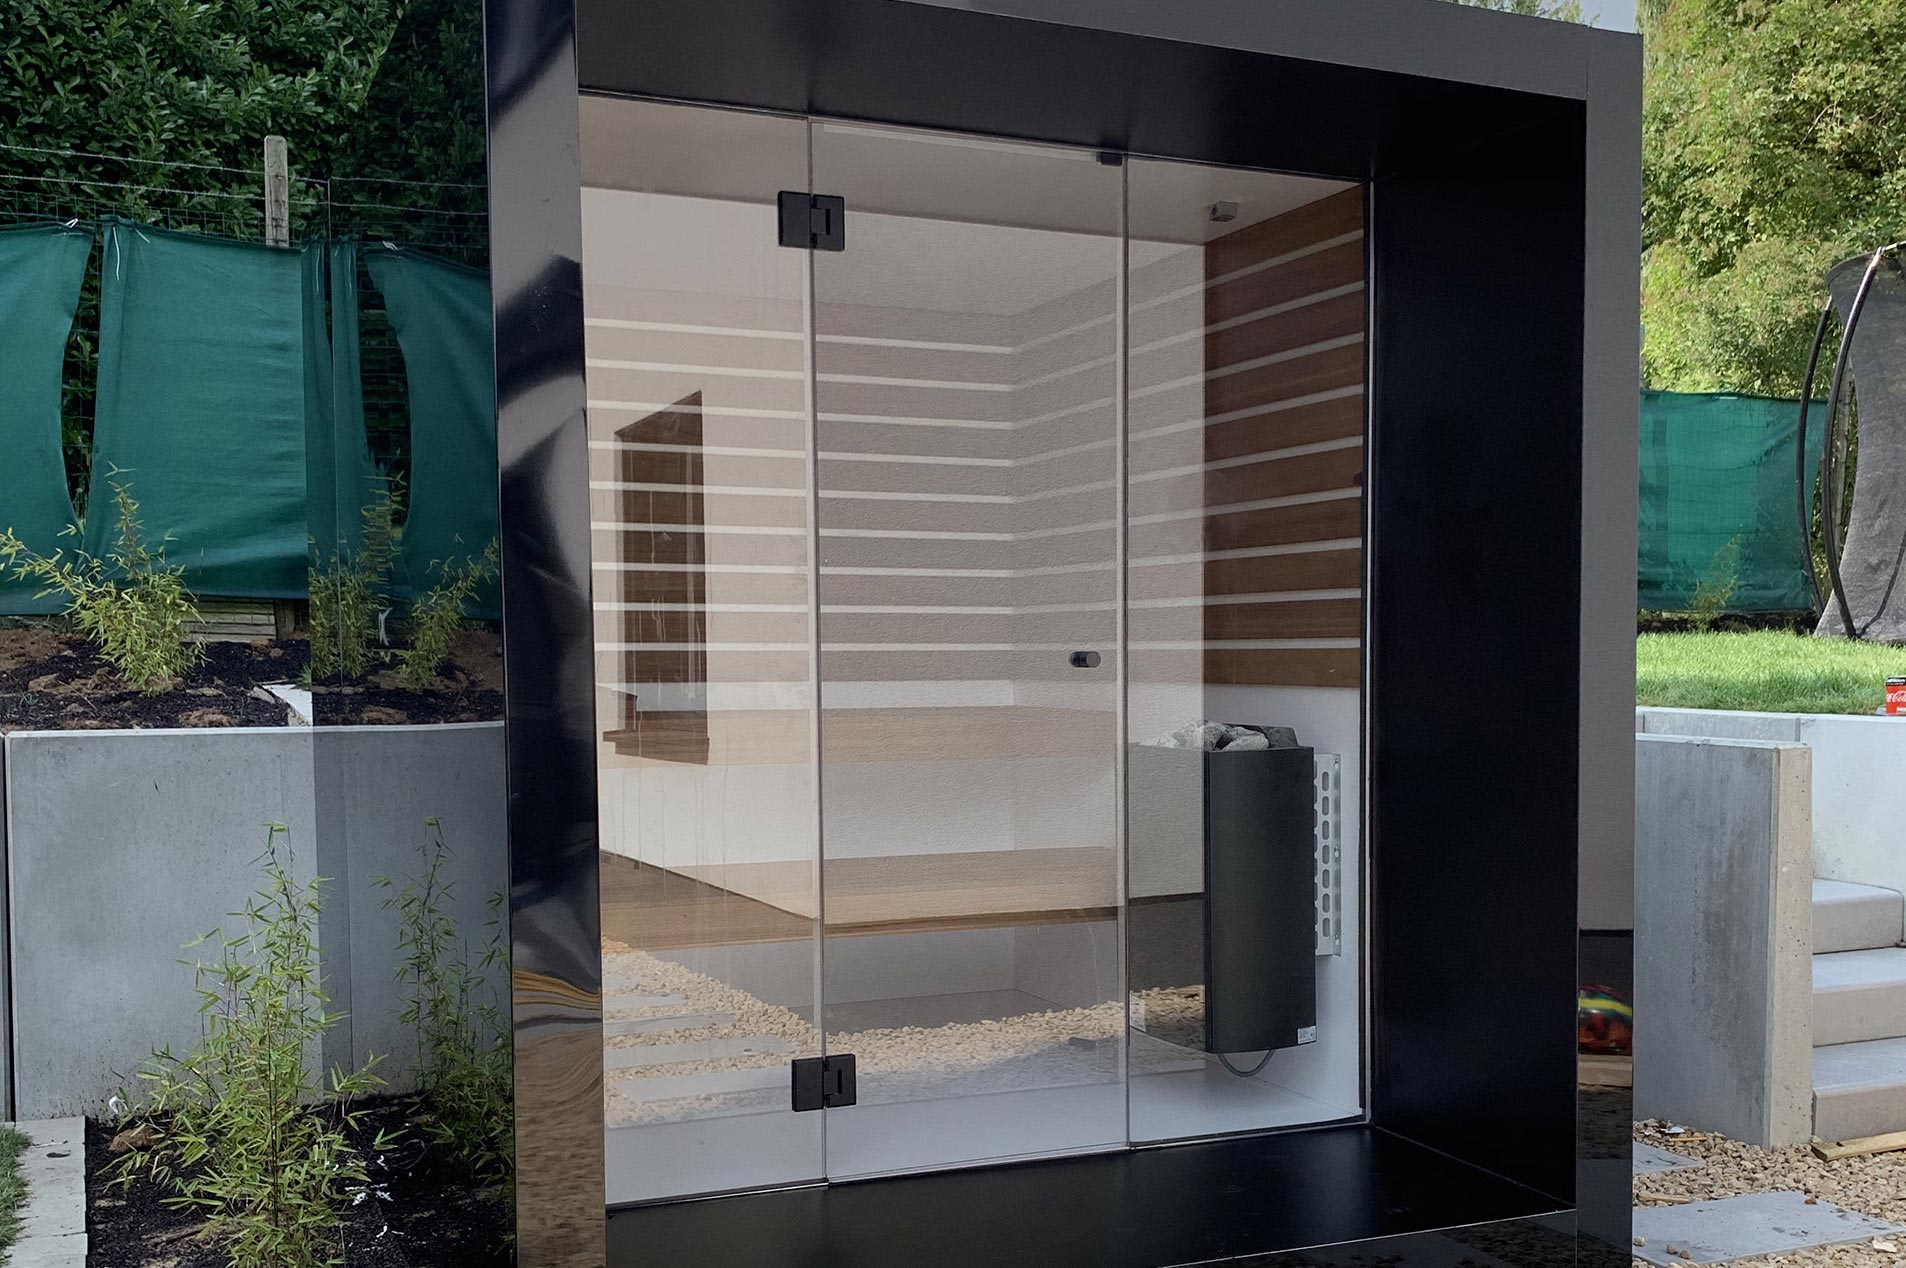 Image shows one of Thermalux's premium outdoor saunas in a garden setting. Thermalux UK are suppliers of Premium Outdoor Saunas, Luxury Outdoor Saunas, and Aluminium Finish Saunas like this one.